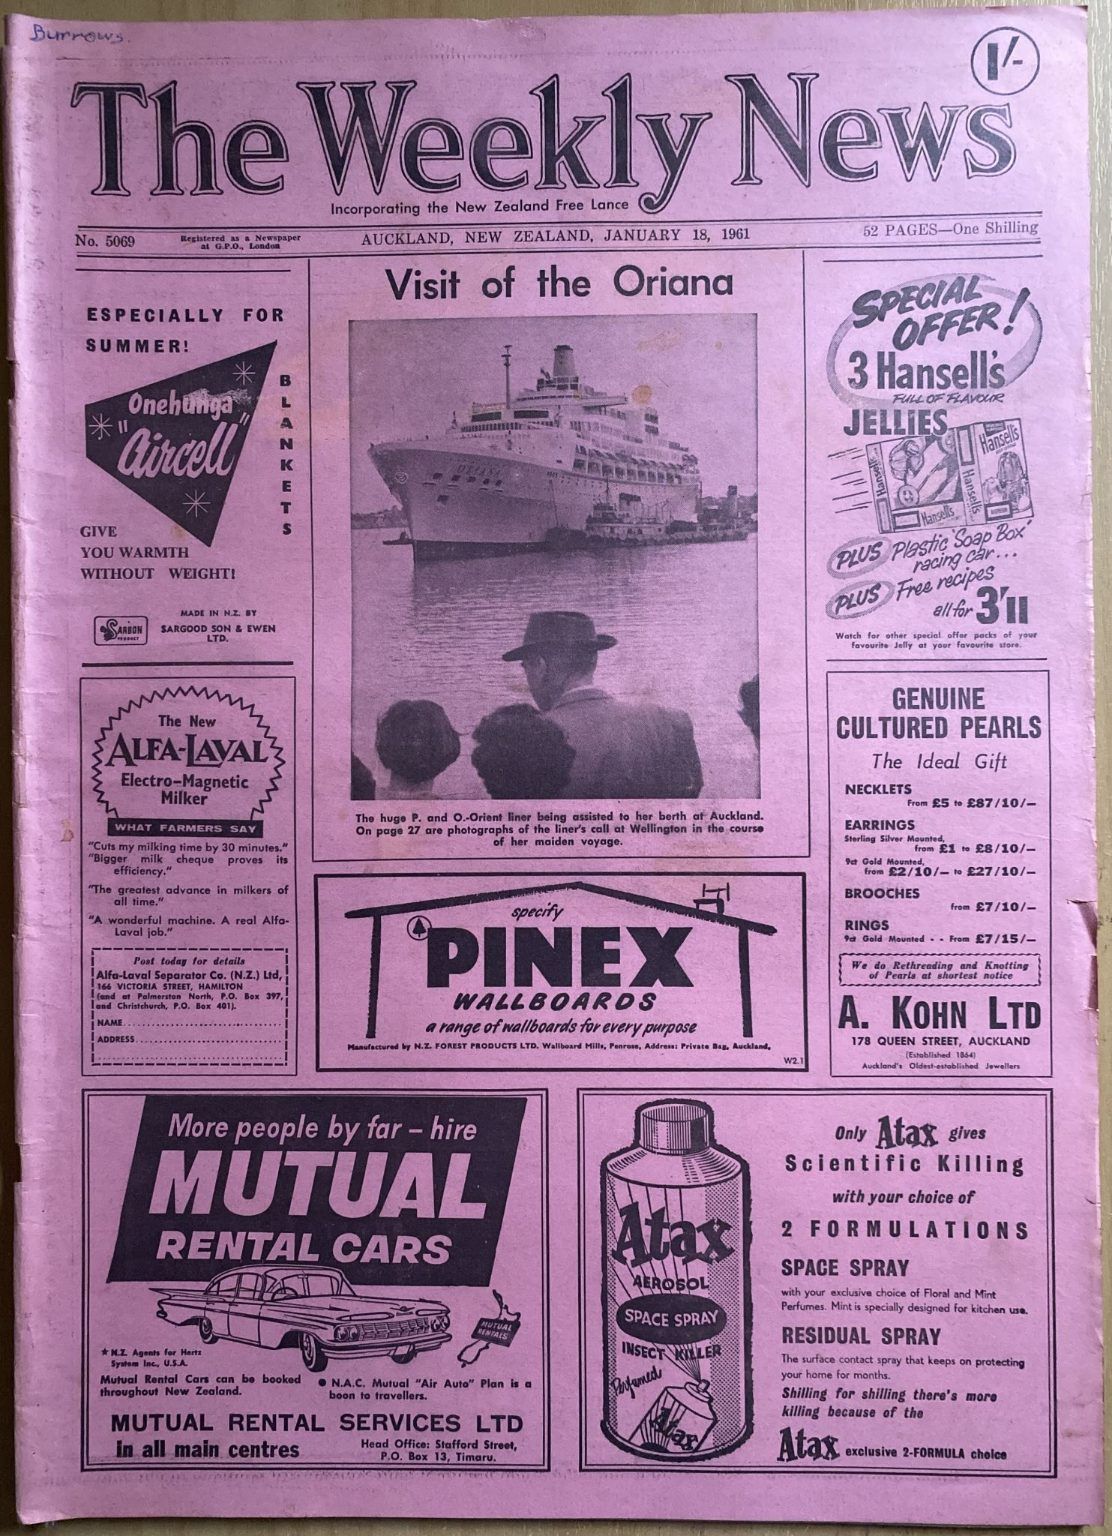 OLD NEWSPAPER: The Weekly News, No. 5069, 18 January 1961